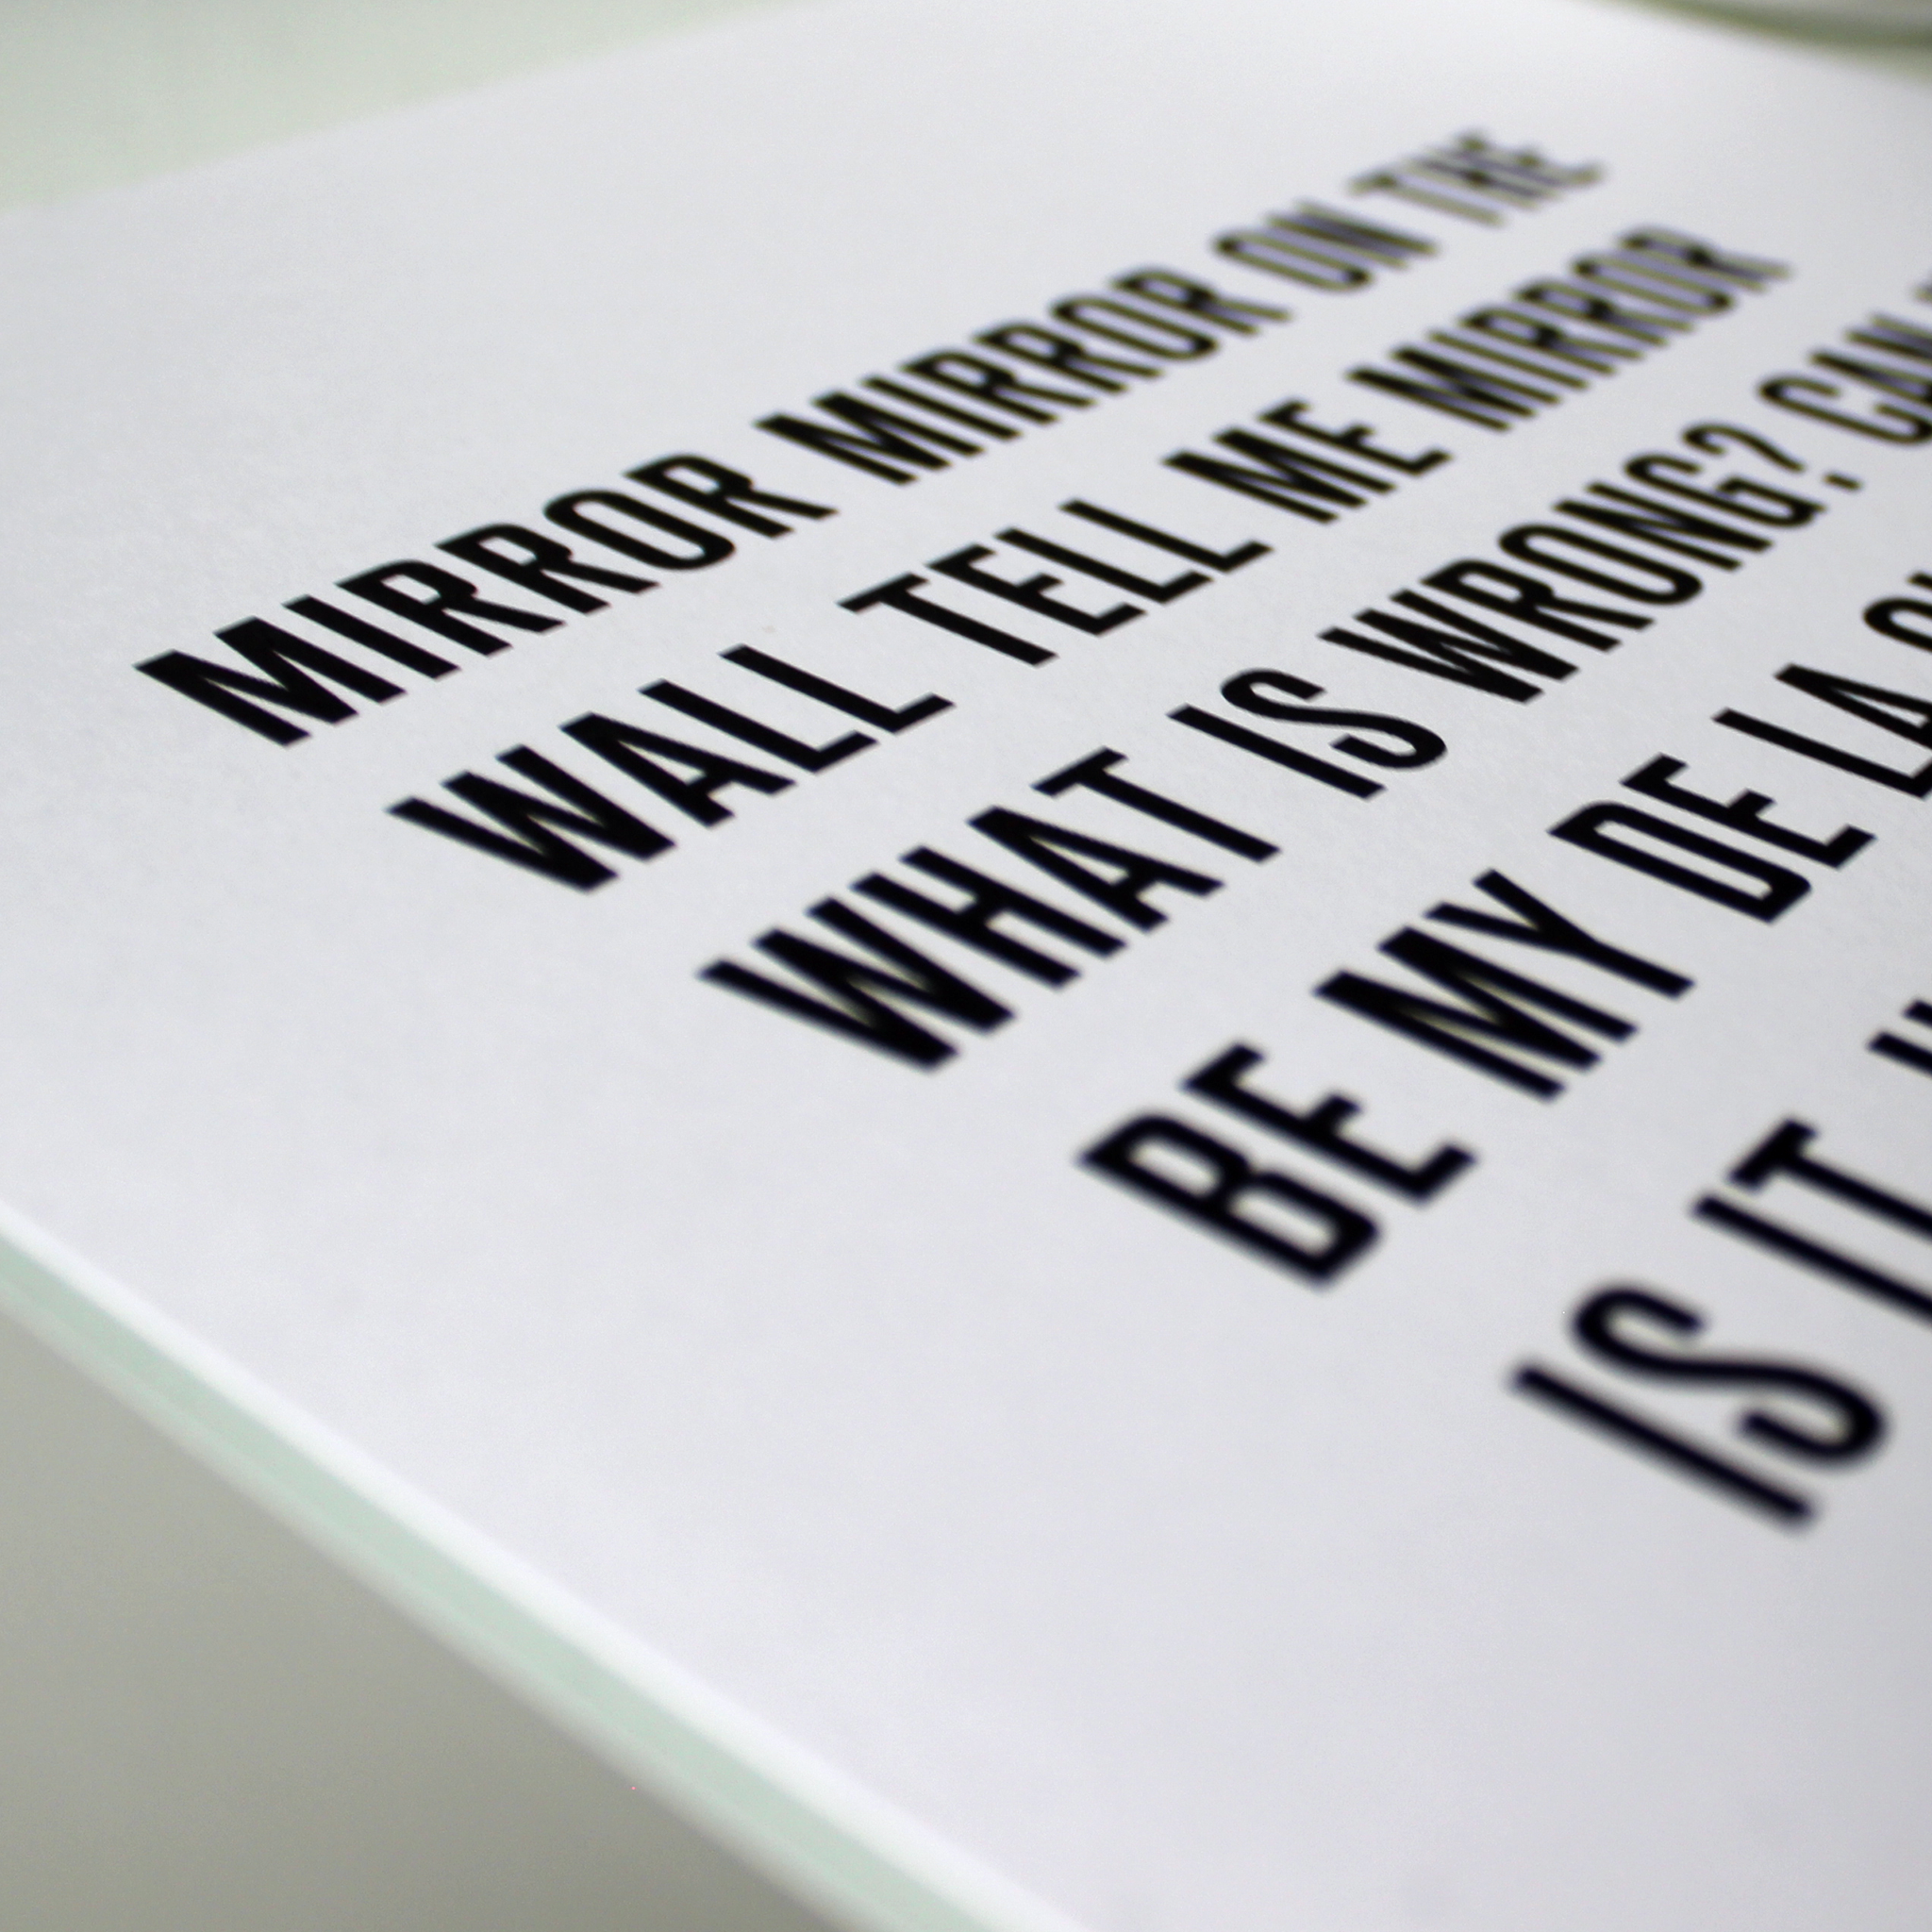 Me Myself and I by De La Soul a Typographic song lyric Poster